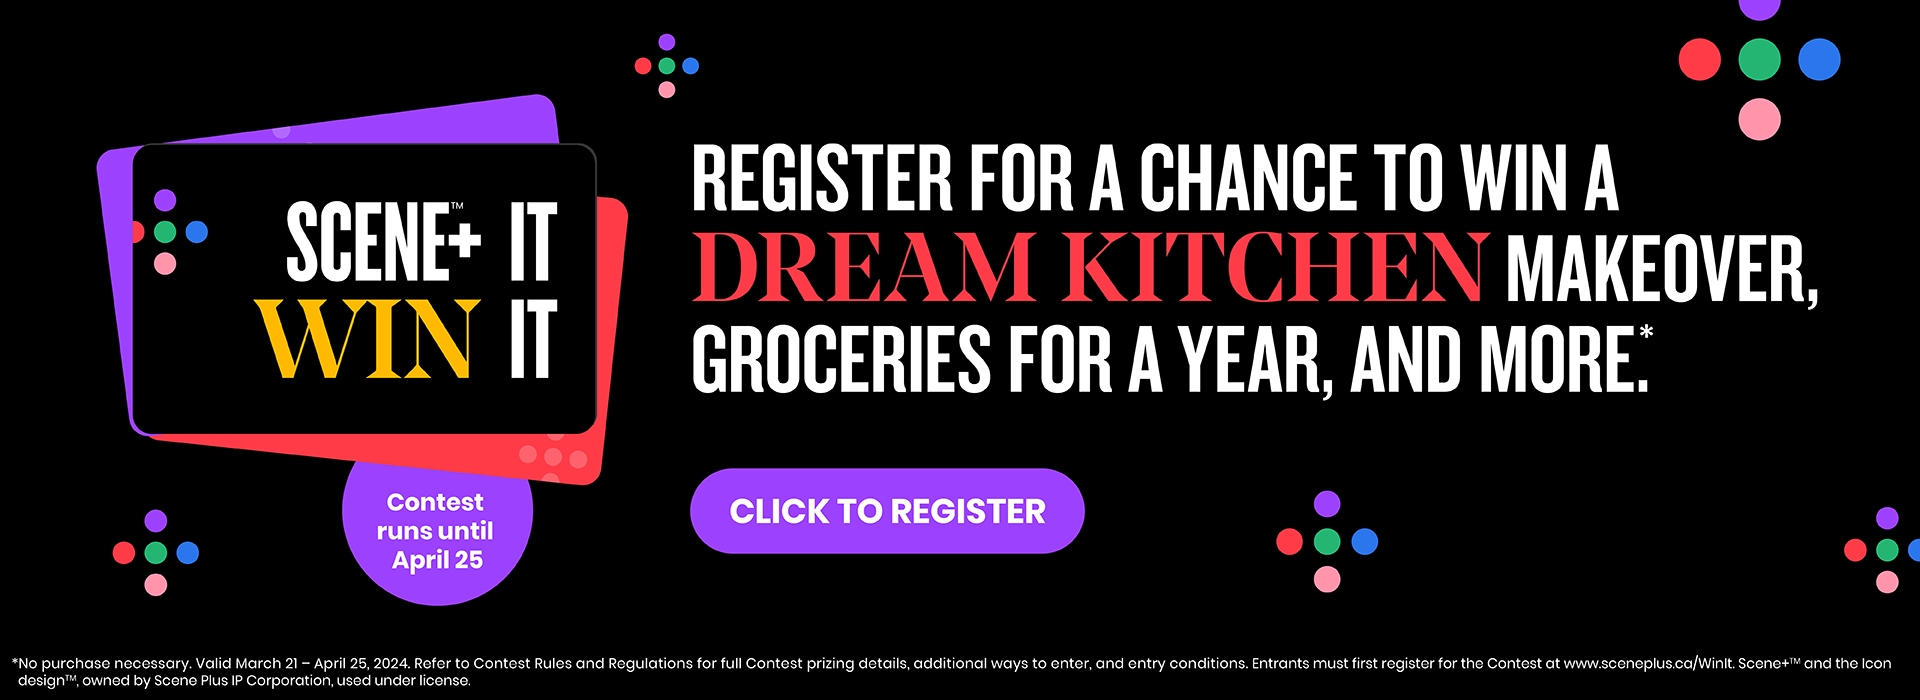 The following image contains the text, " Scene+ It Win It; contest runs until April 25. Register For a Chance to Win a Dream Kitchen Makeover, Groceries for a Year and More," along with a Click to register button.